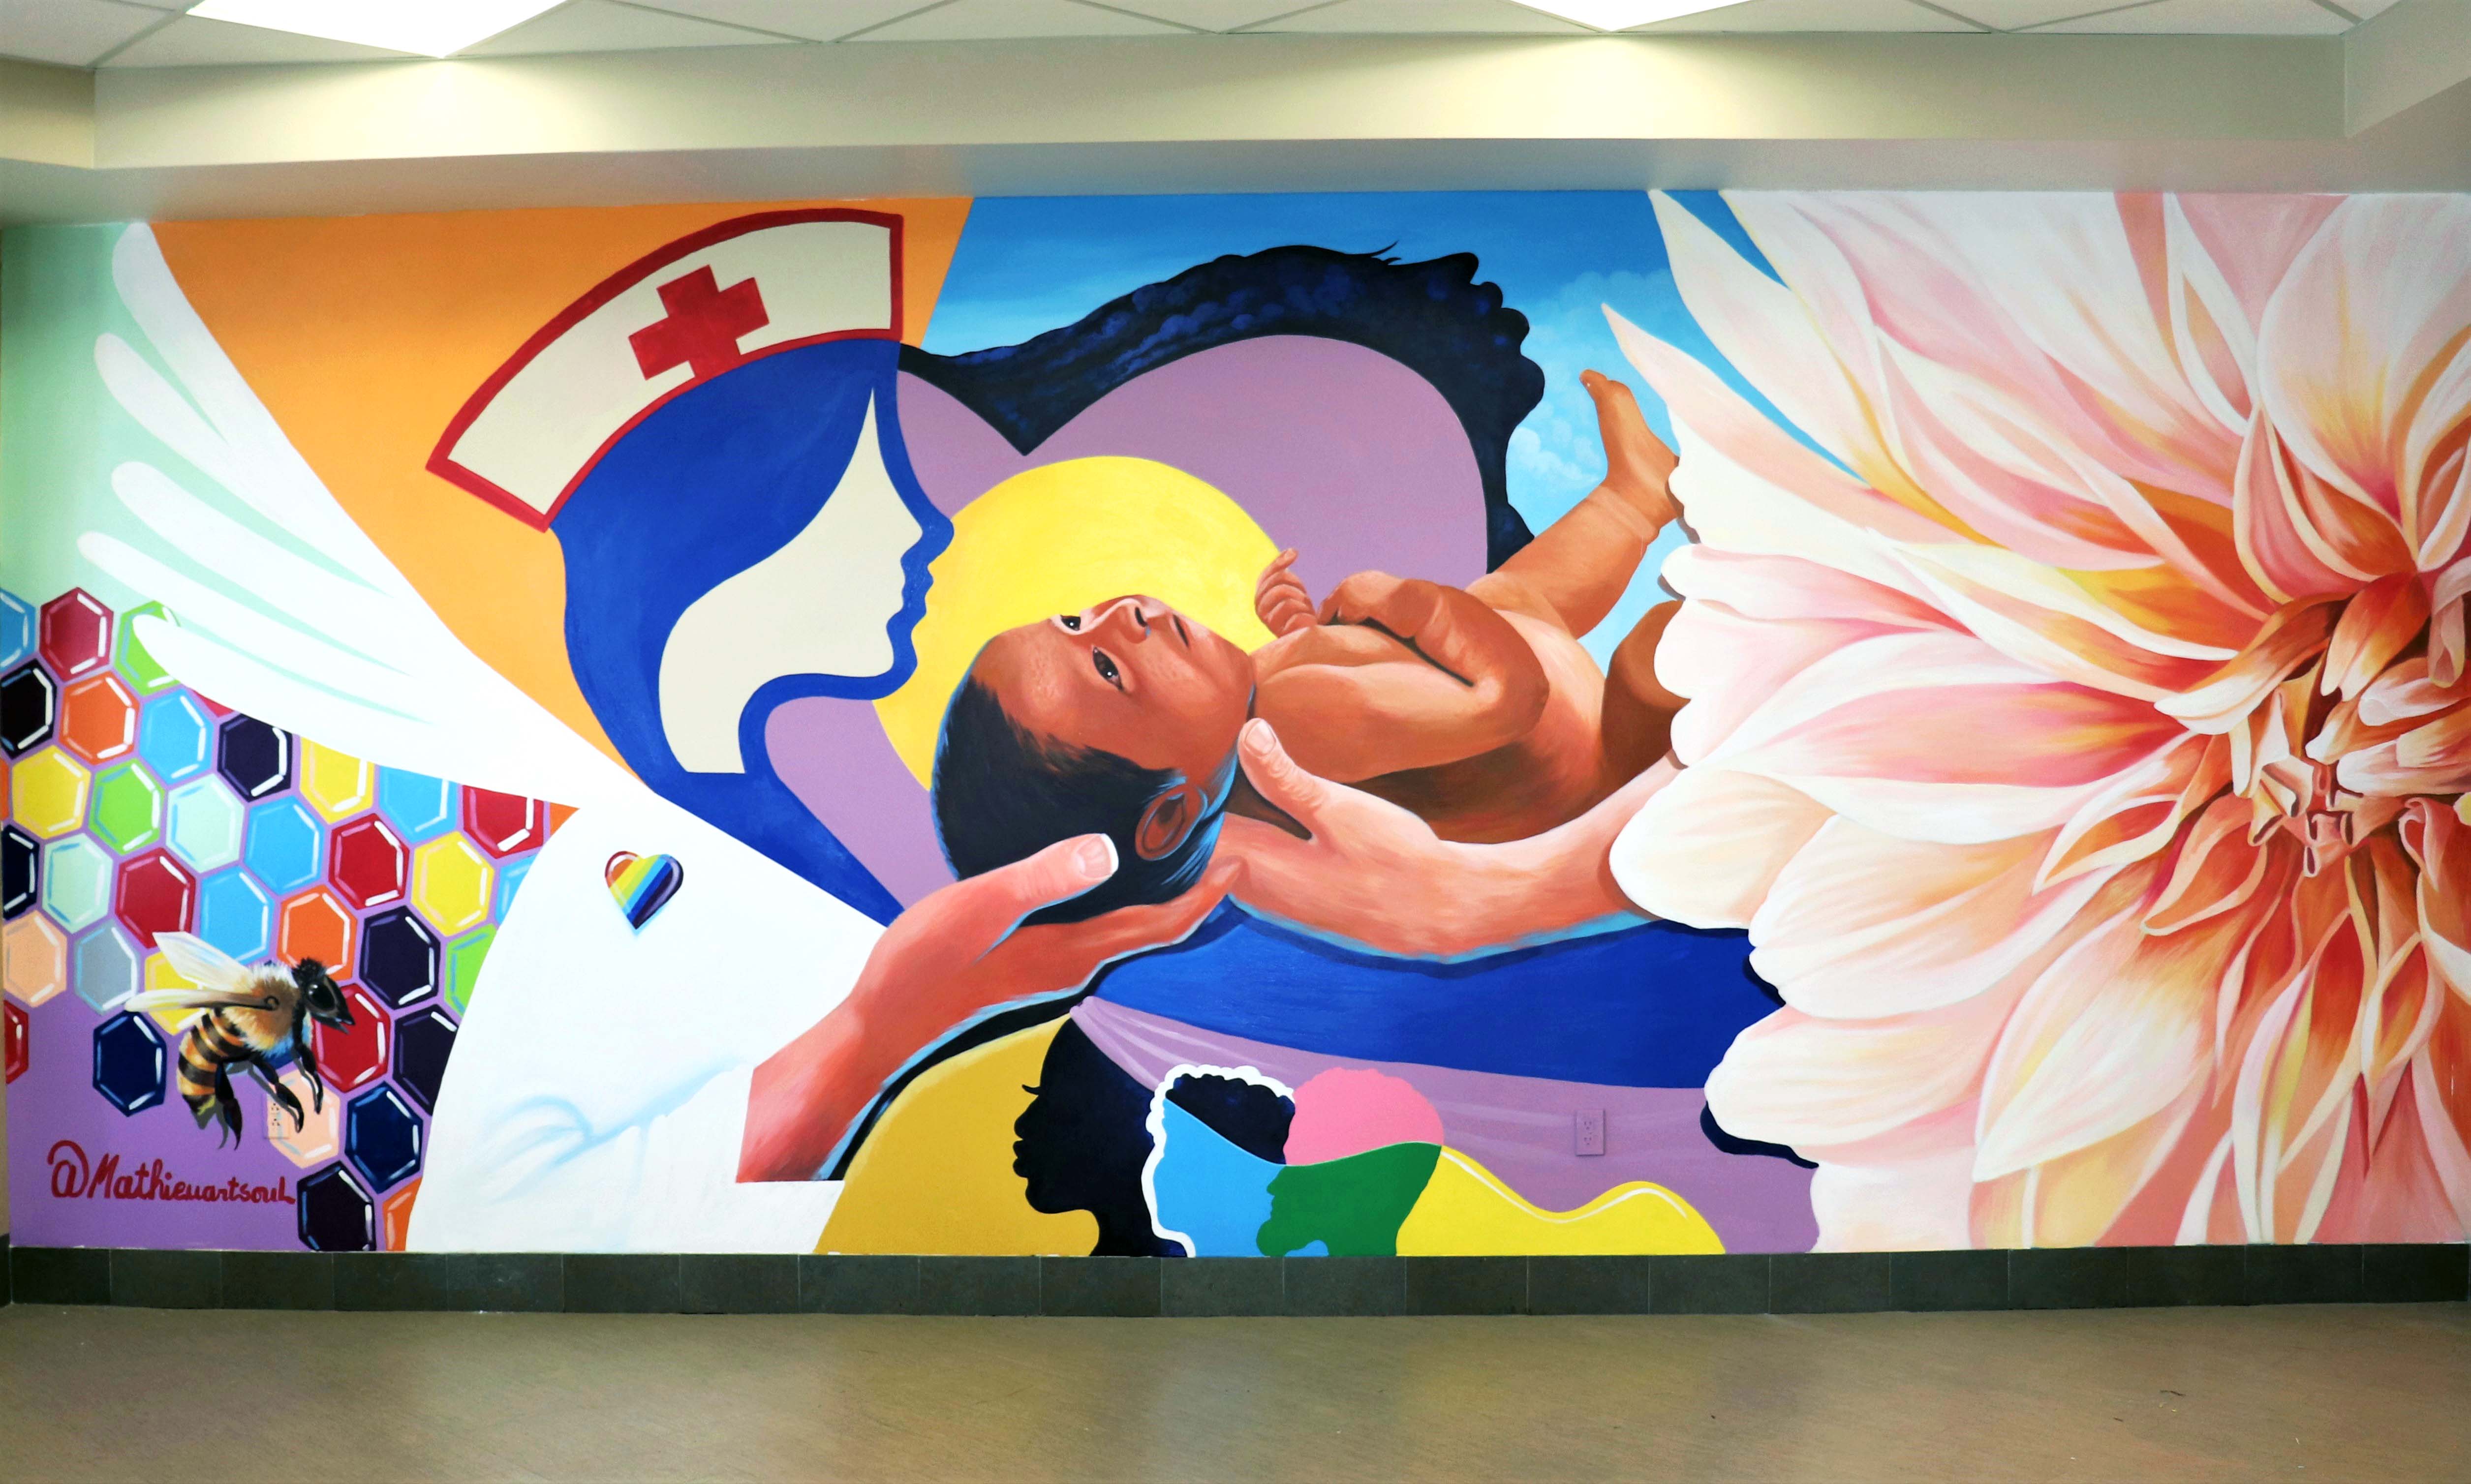 Mathieu Jean Baptiste's mural pays homage to the colleagues of The Woman's Hospital of Texas, who are continuing to provide care during the pandemic. Every aspect of the mural symbolizes different aspects of the hospital. 